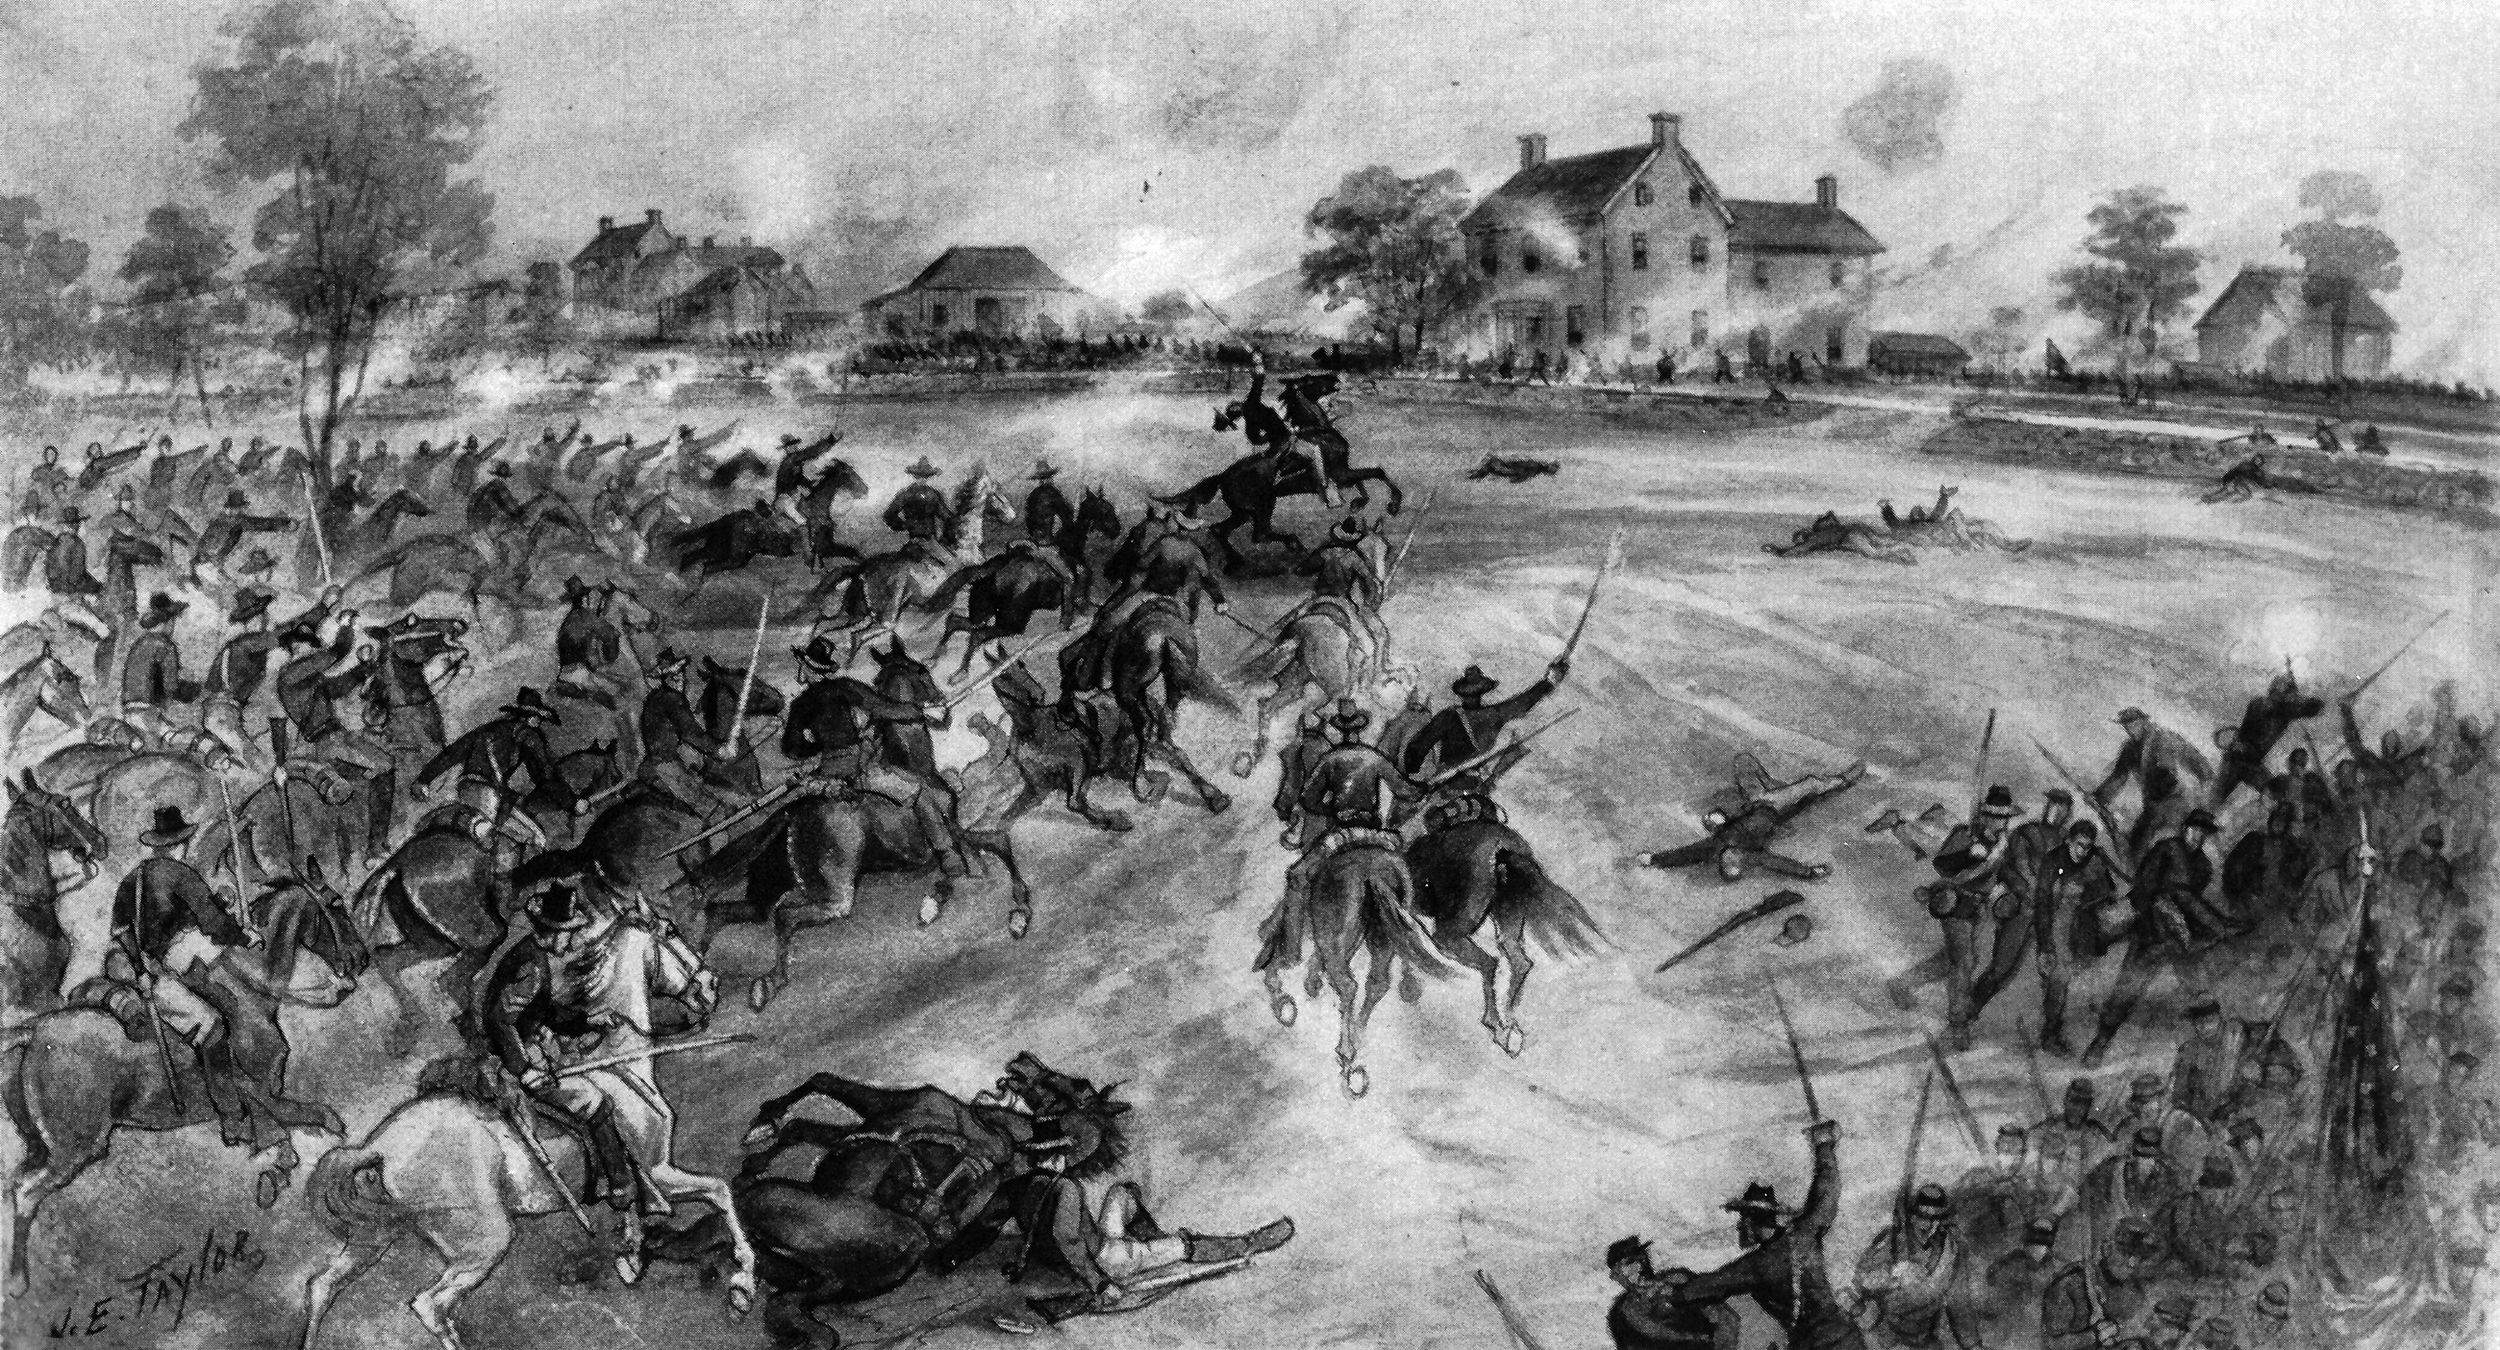 Union Colonel Charles Russell Lowell was mortally wounded leading a brigade in Merritt’s cavalry during the Union counter-attack on the grounds of Belle Grove Plantation at the Battle of Cedar Creek, Virginia.